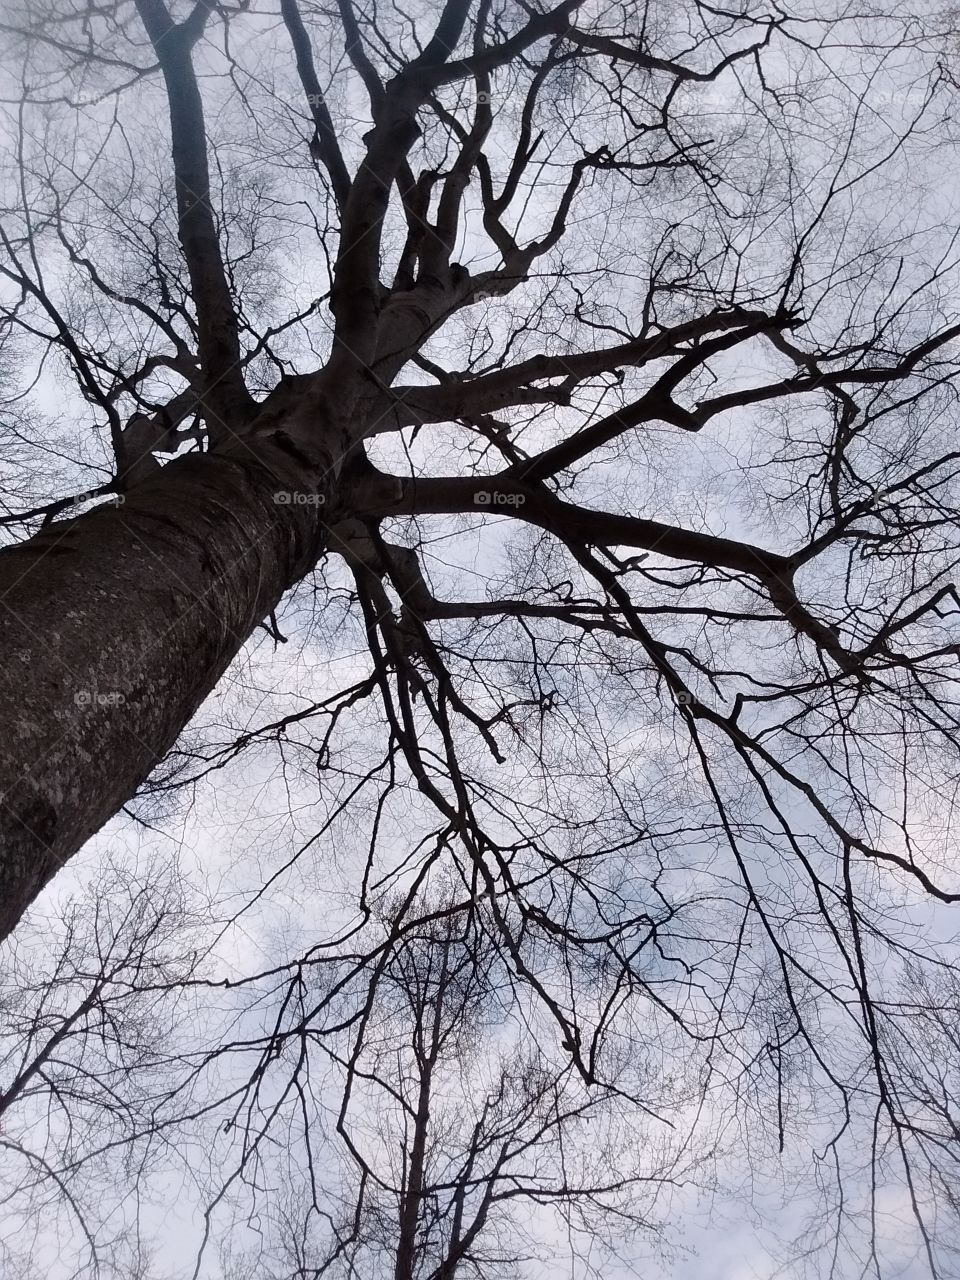 Looking up the tree